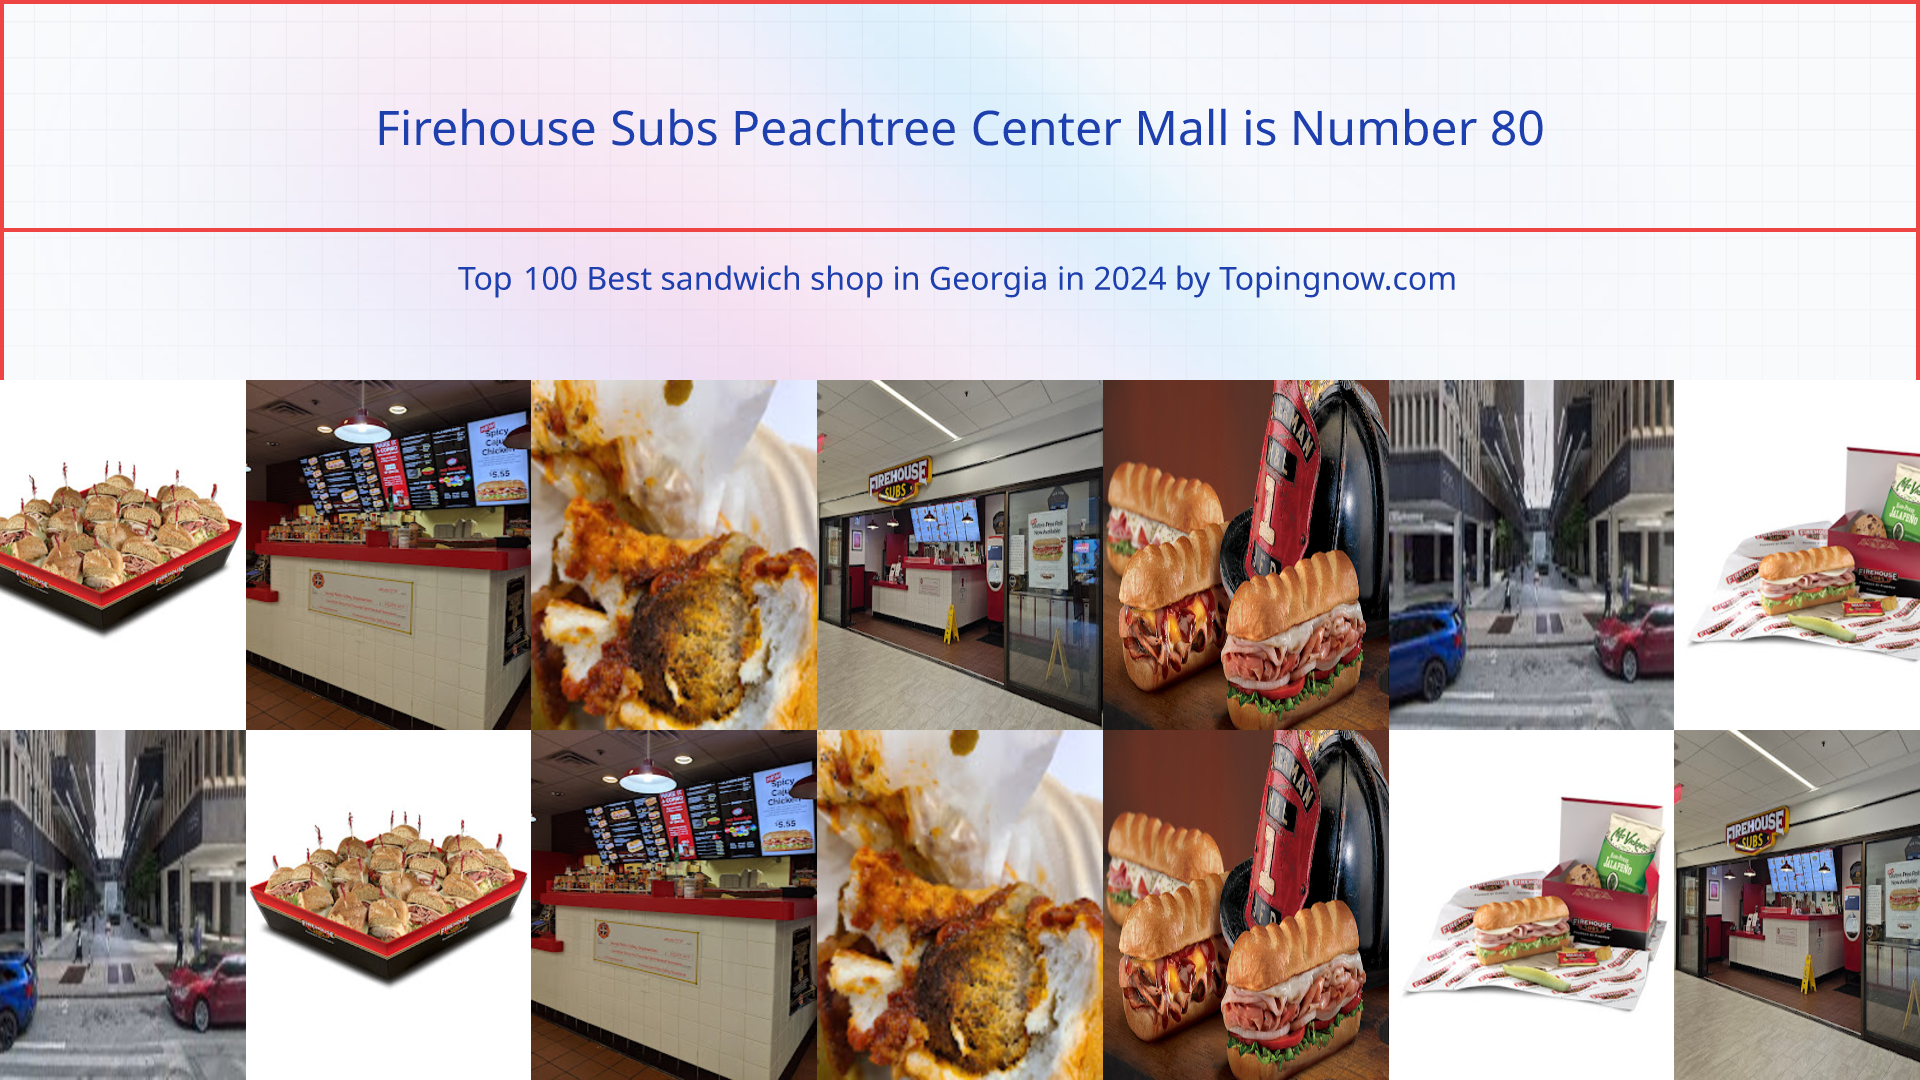 Firehouse Subs Peachtree Center Mall: Top 100 Best sandwich shop in Georgia in 2024